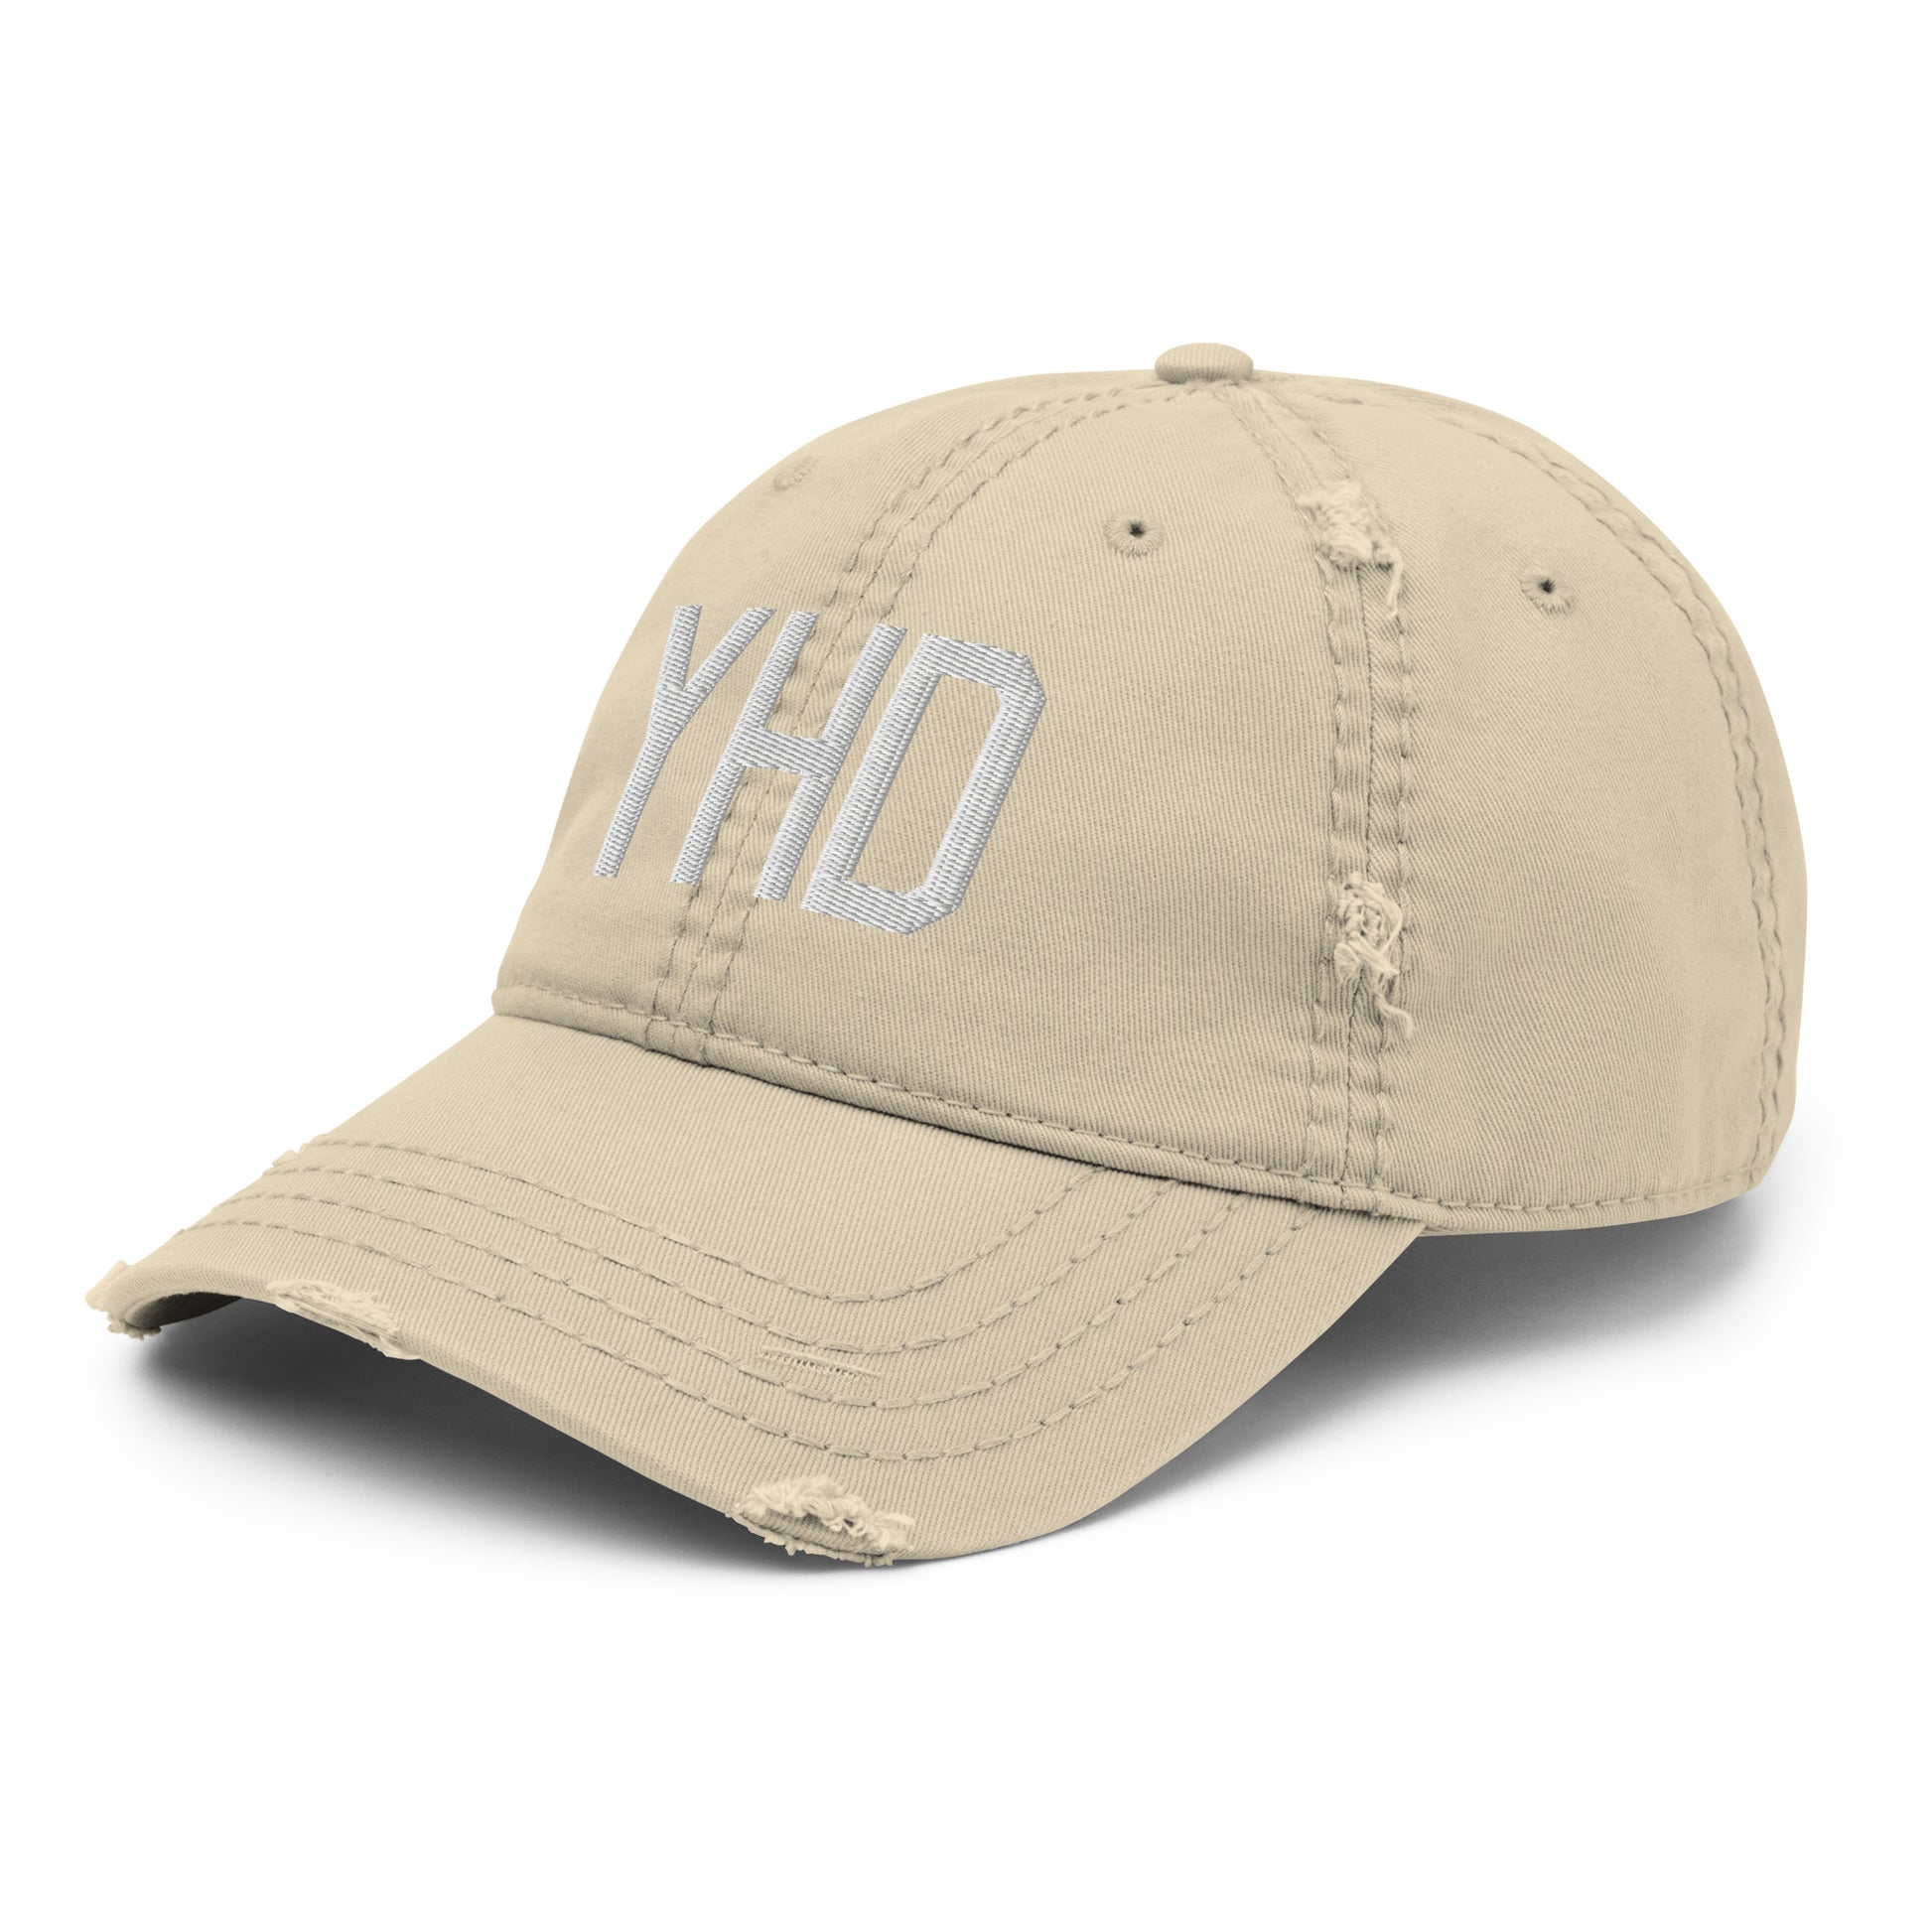 Airport Code Distressed Hat - White • YHD Dryden • YHM Designs - Image 19